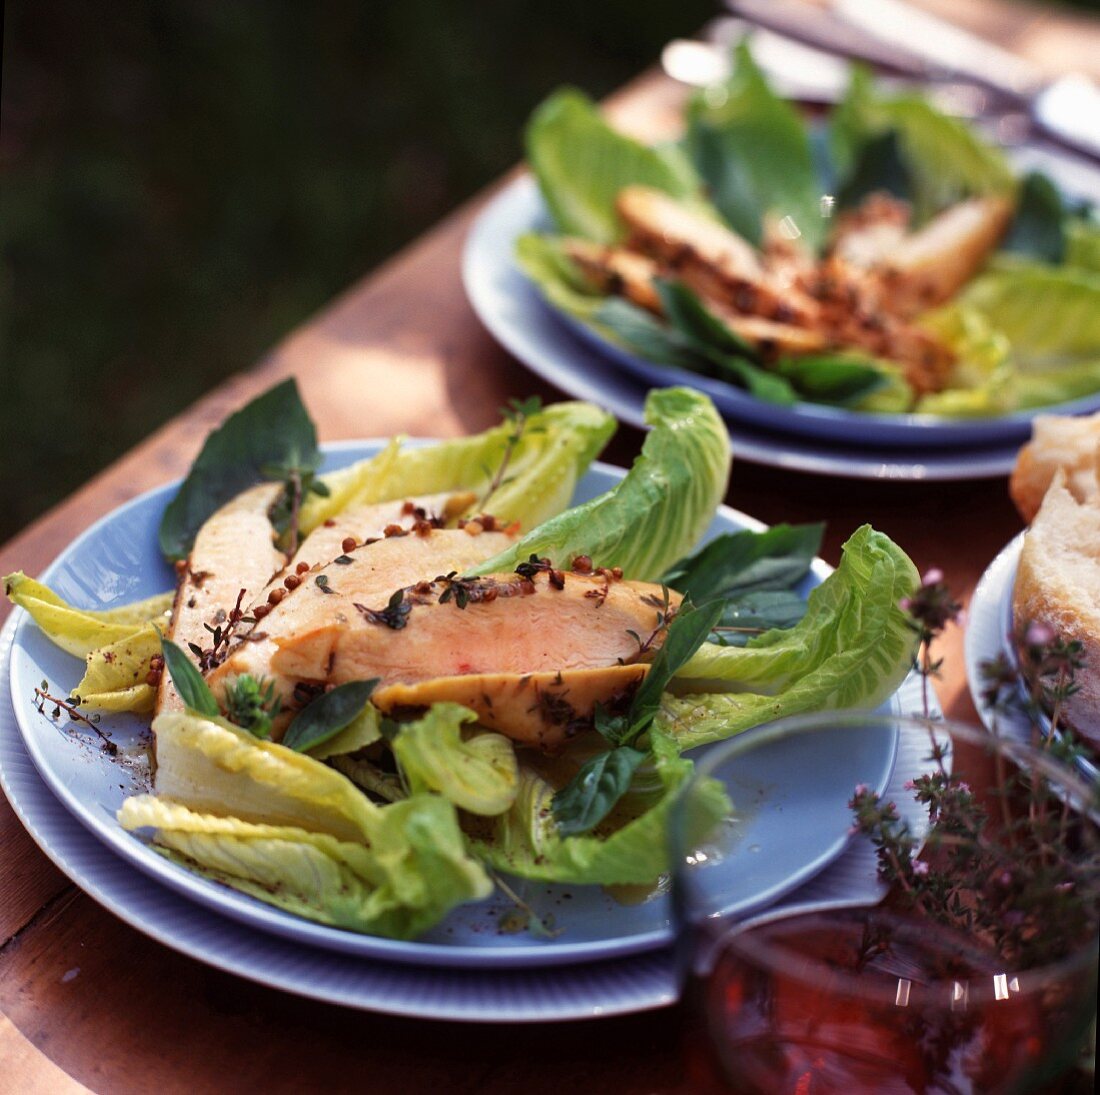 Cos lettuce with marinated chicken